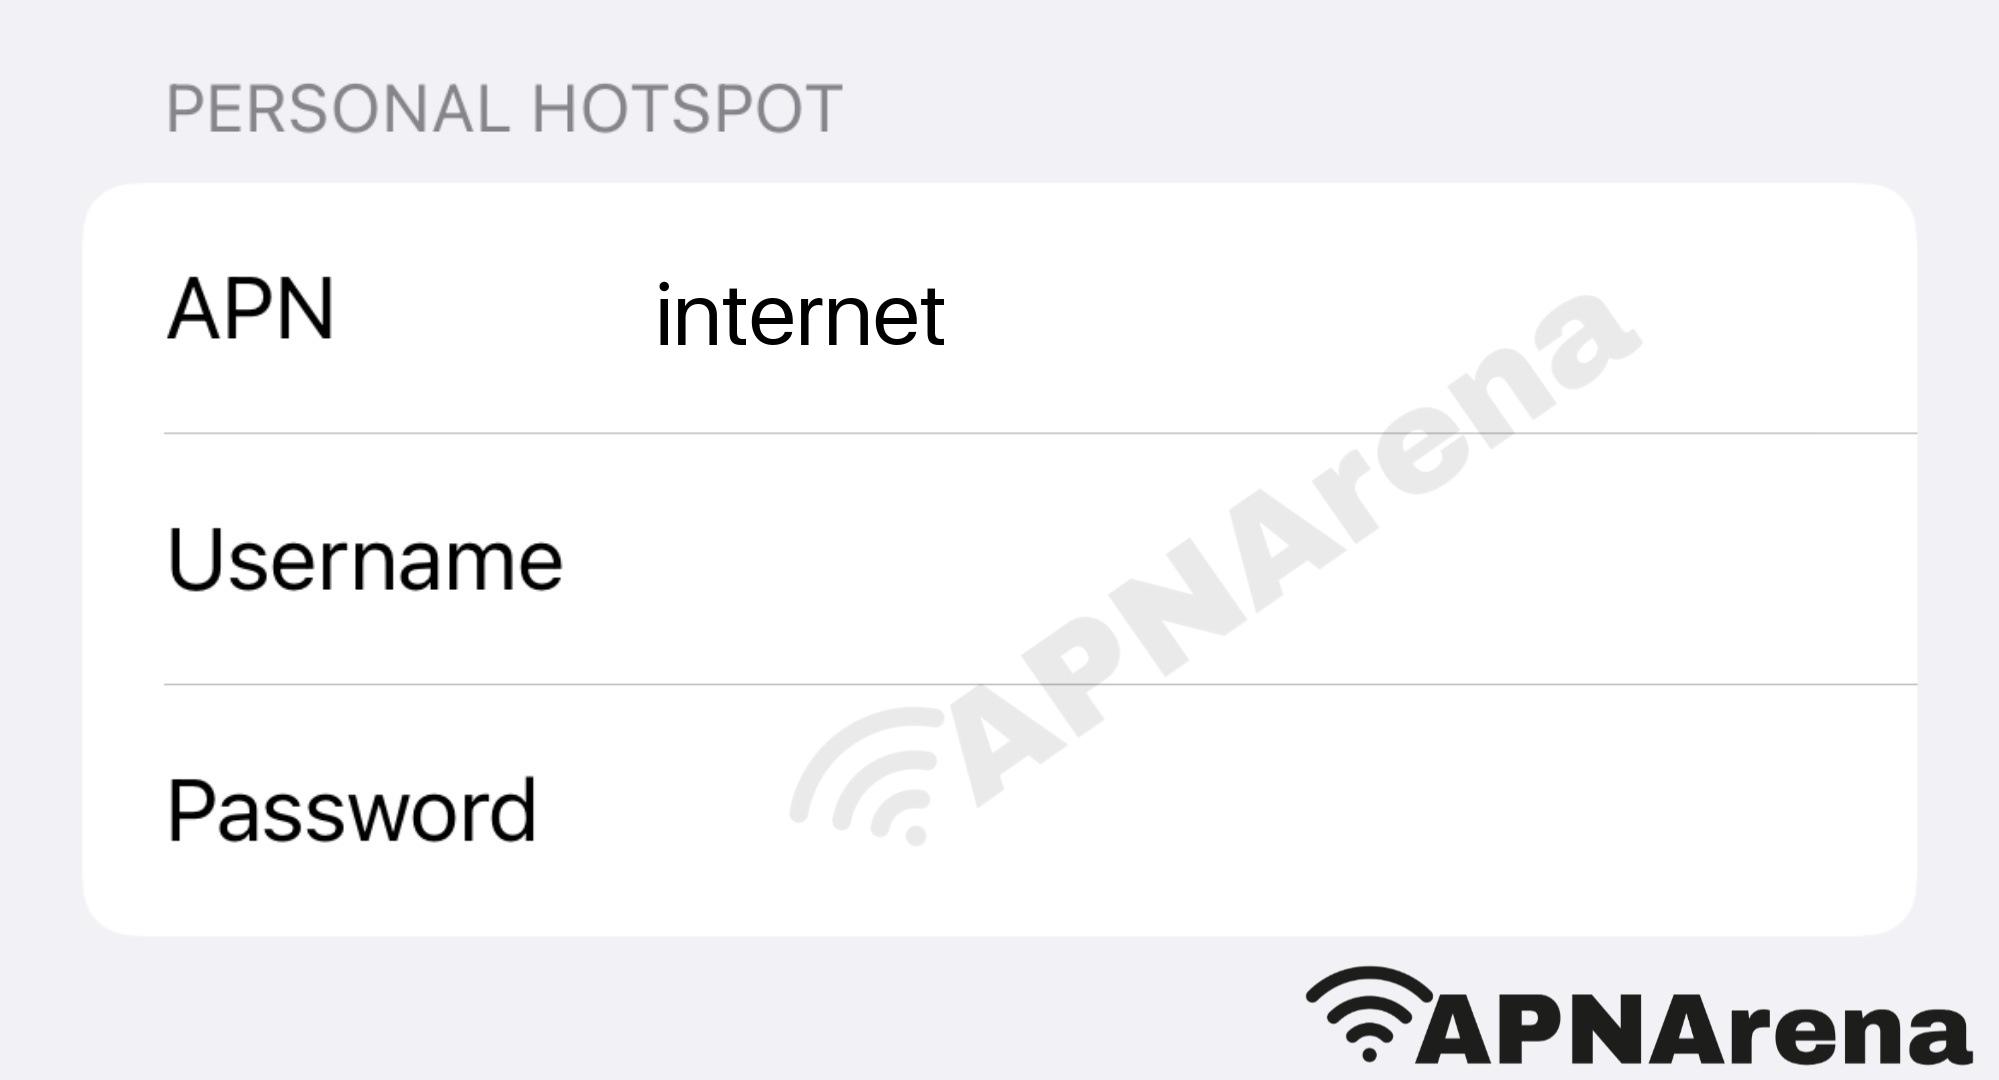 eir (Meteor) Personal Hotspot Settings for iPhone